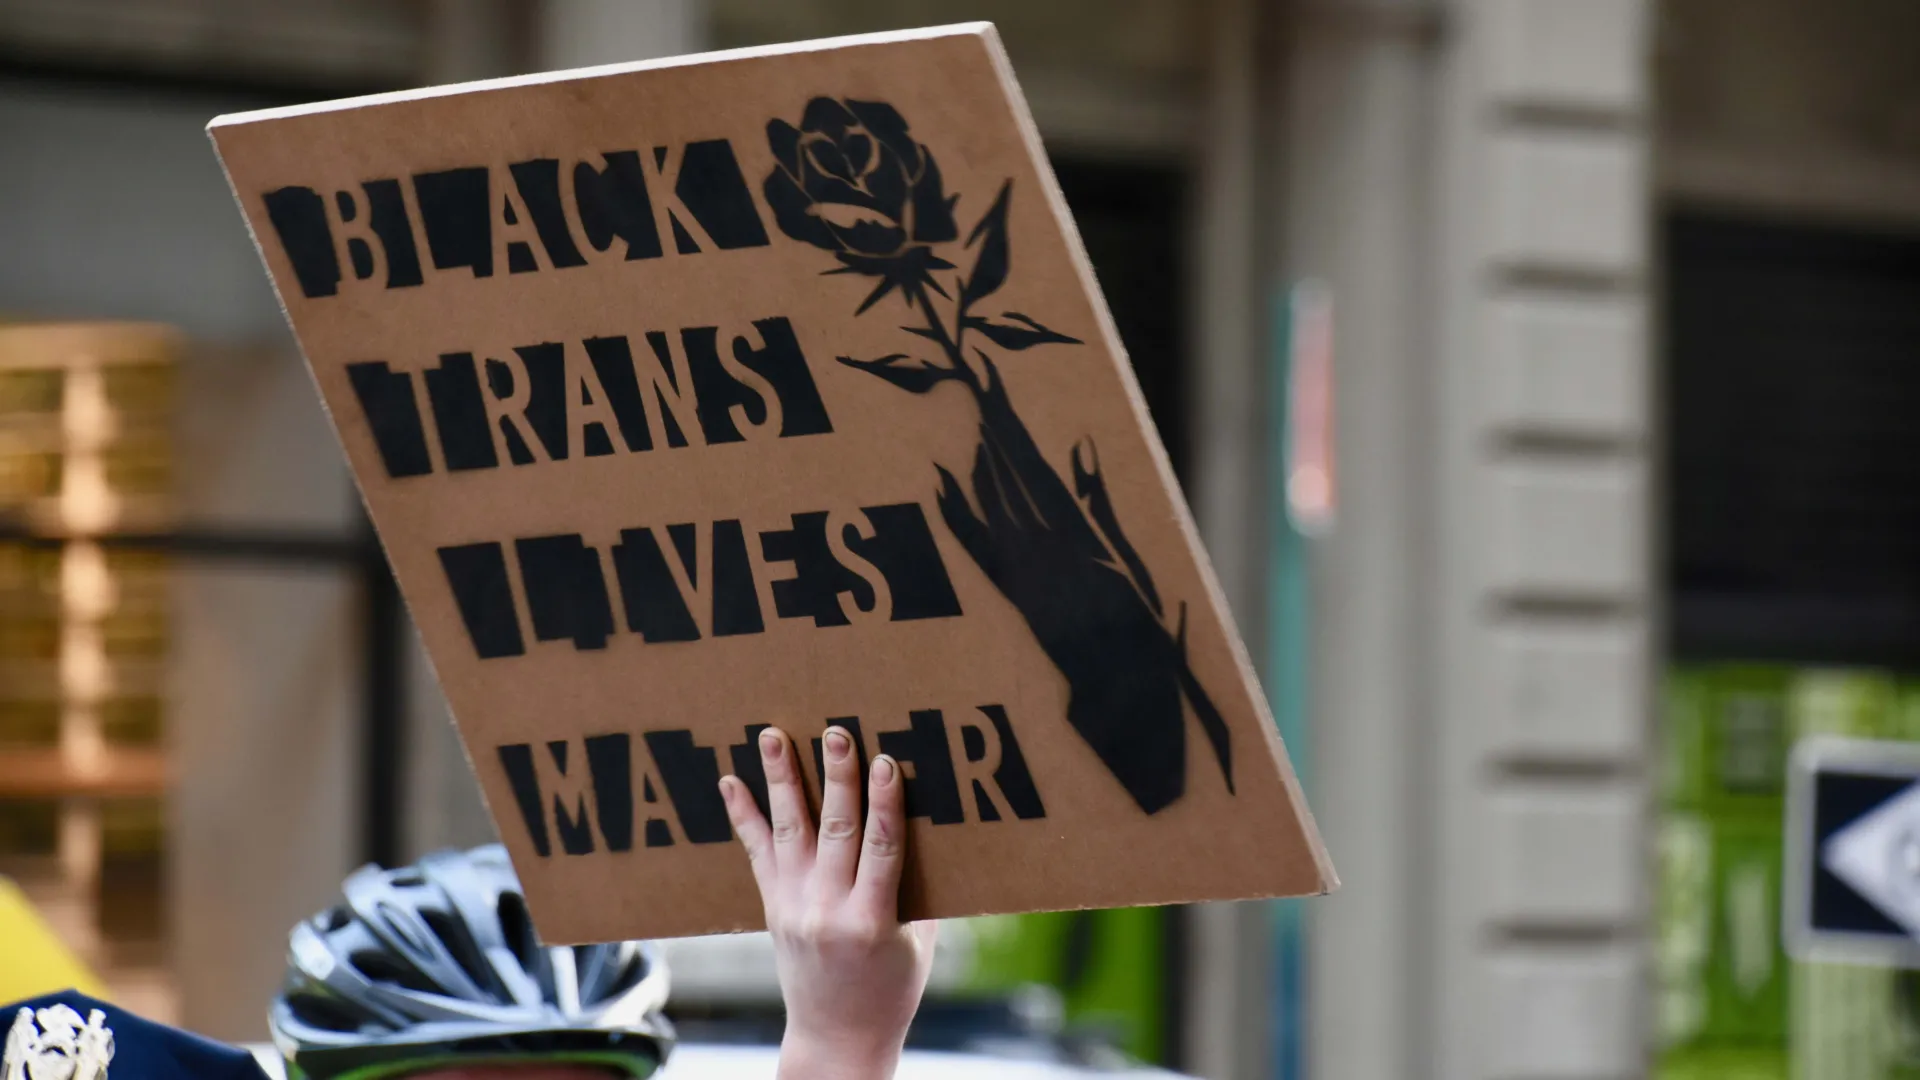 Black Trans Lives Matter sign at the May Day 2017 in New York City. The eighth program in the university’s Conversations on Race and Policing series will take place at 4 p.m. Wednesday on Zoom. Photo by Alec Perkins via Wikimedia Commons.